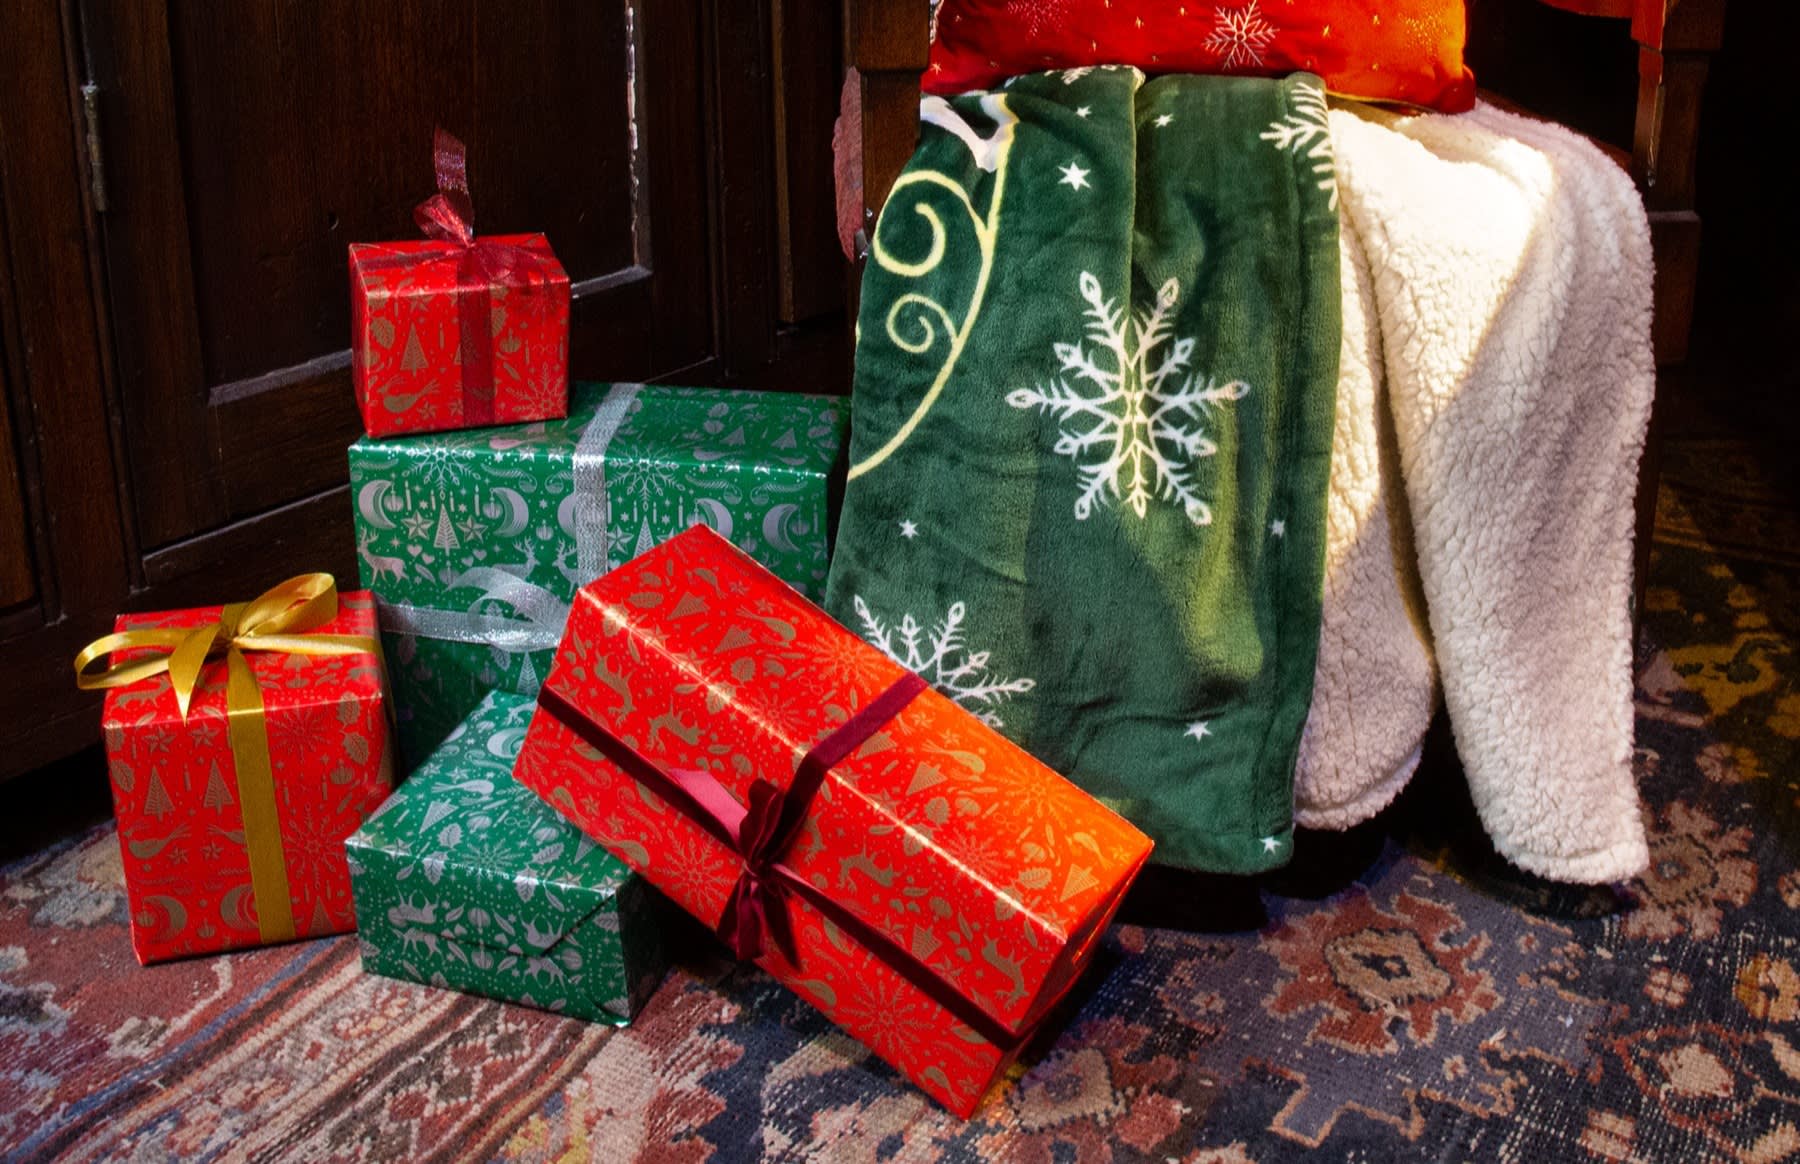 A festive picture of a wizarding world-themed throw on a chair with some cushions and presents